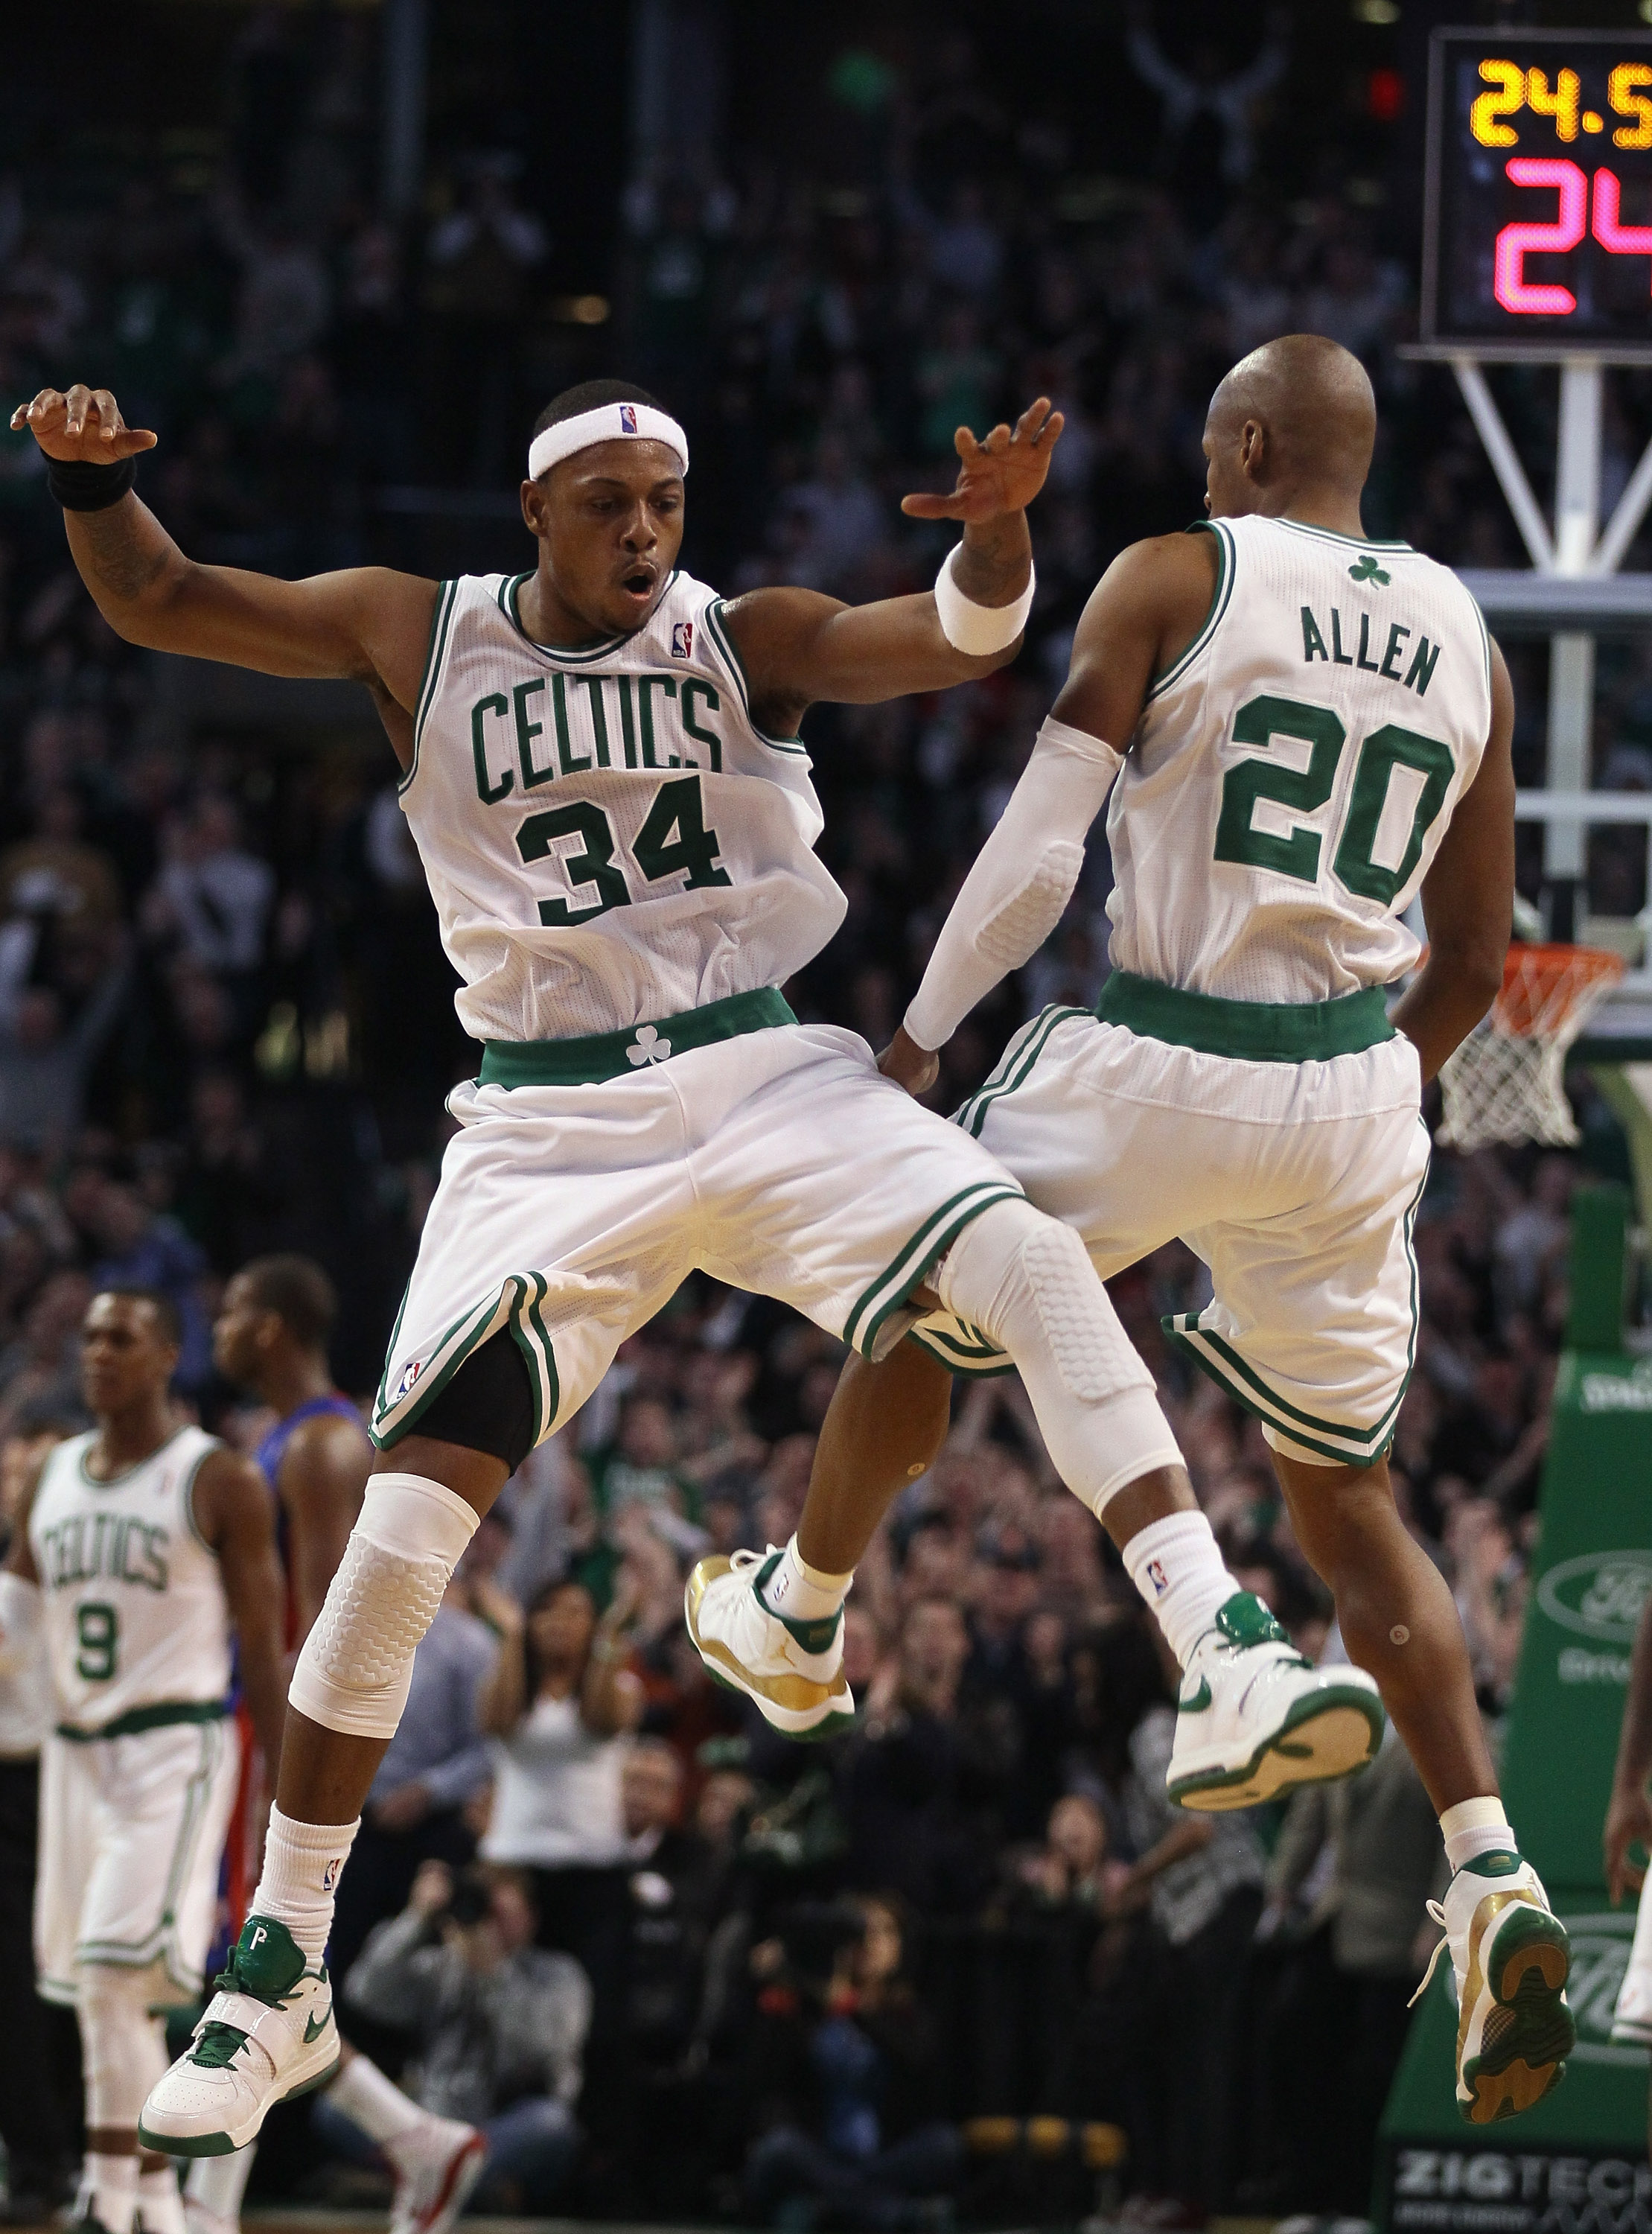 Lakers vs. Celtics: Which team full of all time greats would prevail?